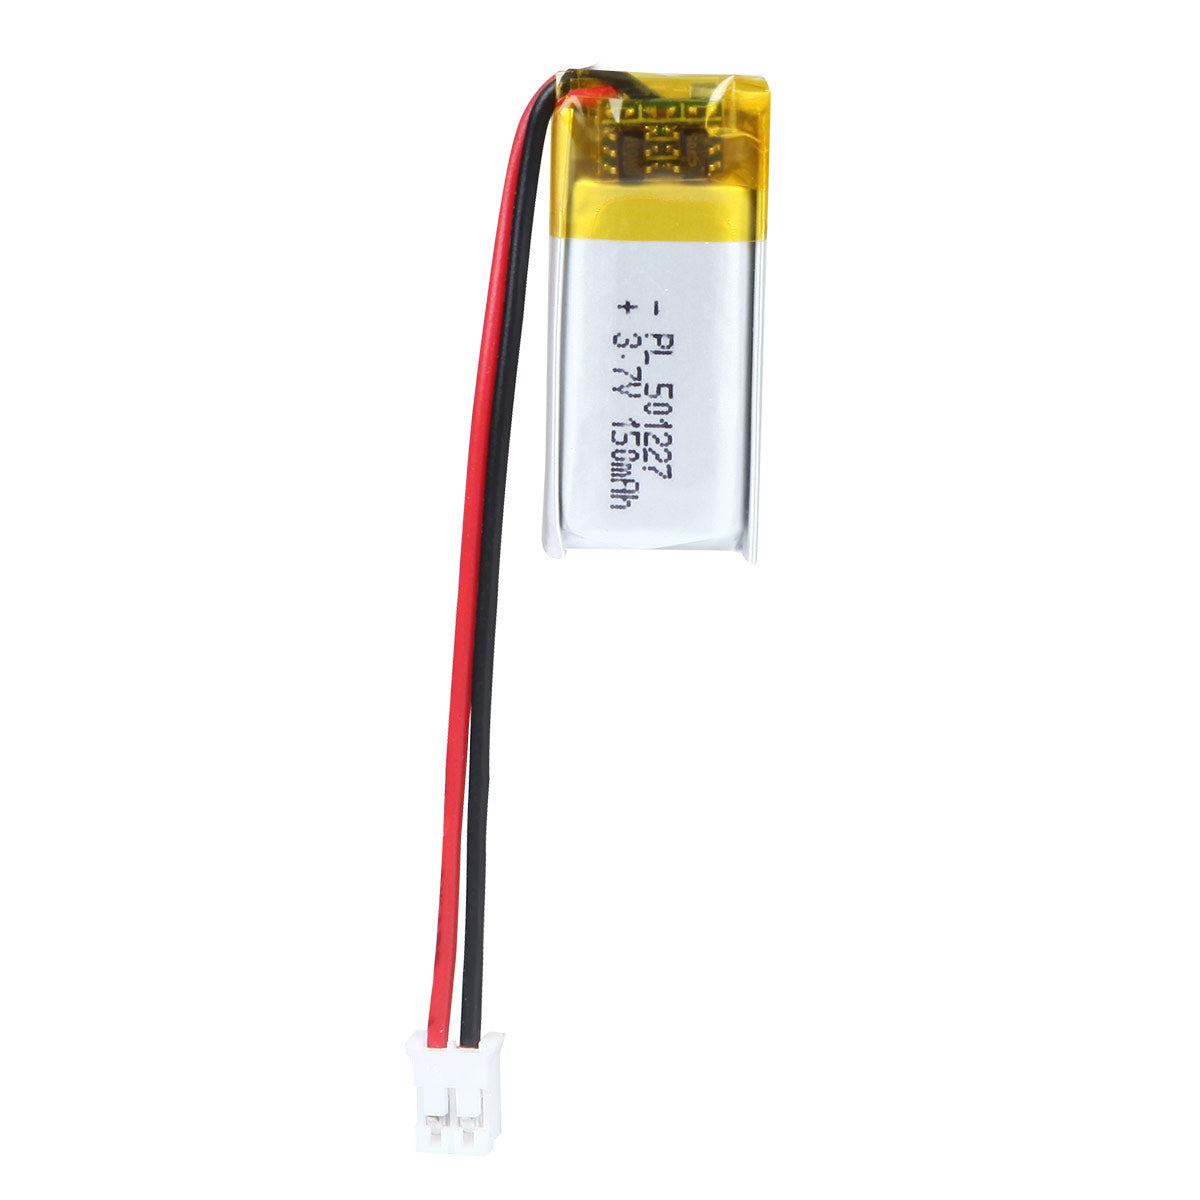 YDL 3.7V 150mAh 402025 Rechargeable Lithium Polymer Battery Length 27mm